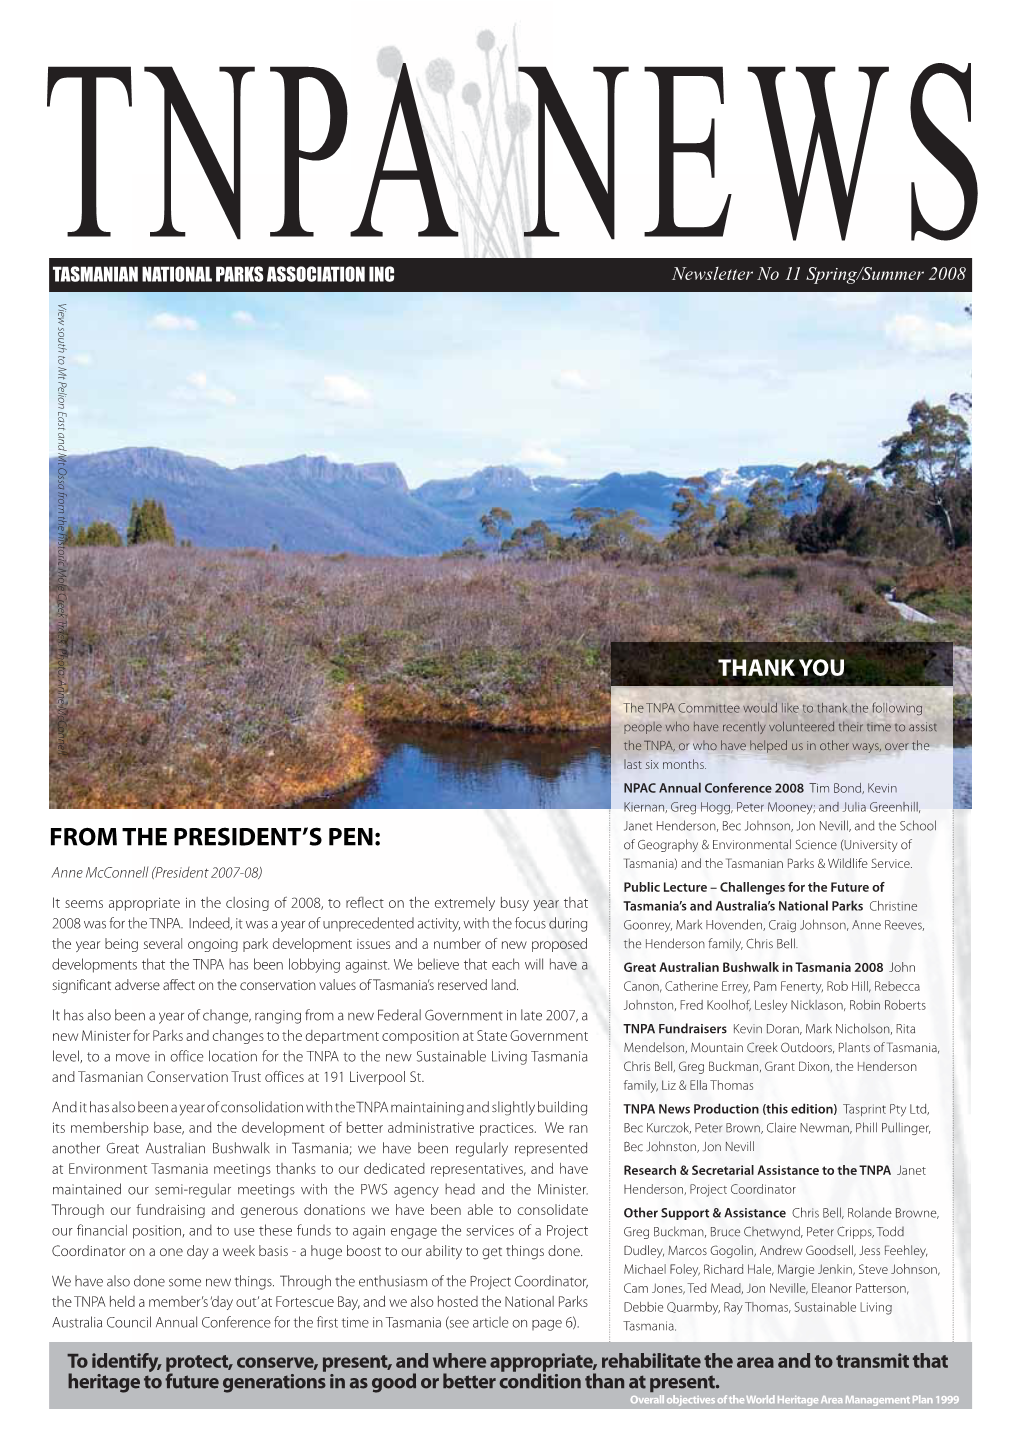 TNPA News Production (This Edition) Tasprint Pty Ltd, Its Membership Base, and the Development of Better Administrative Practices